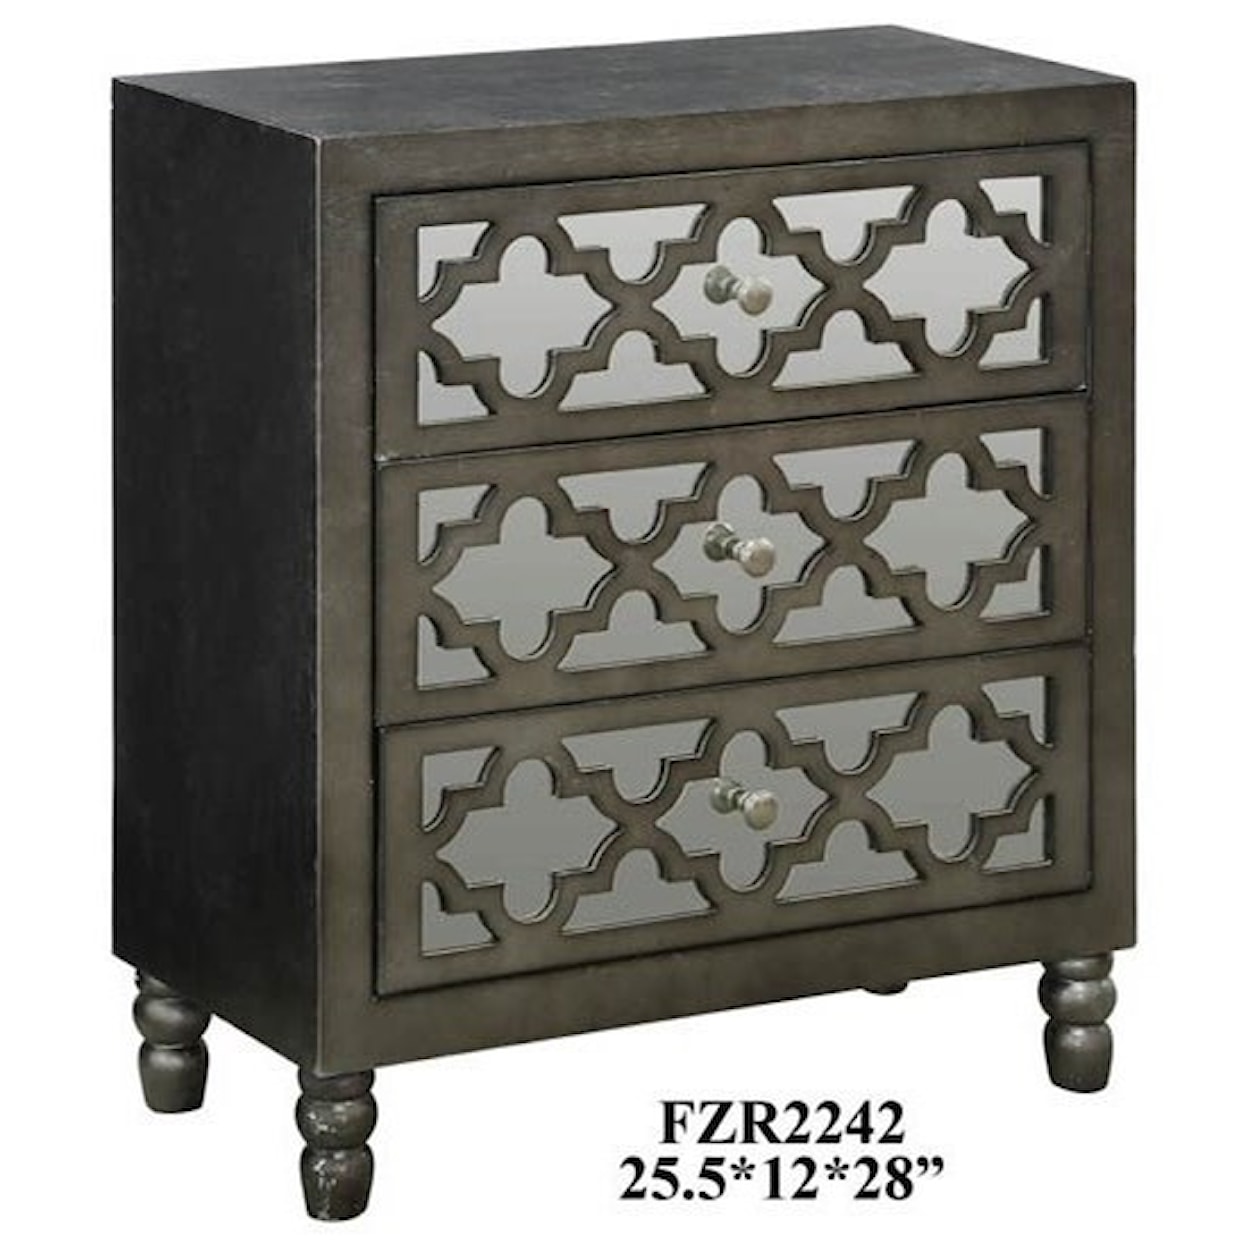 Crestview Collection Accent Furniture Avery 3 Mirrored Drawer Silver Leaf Chest w/